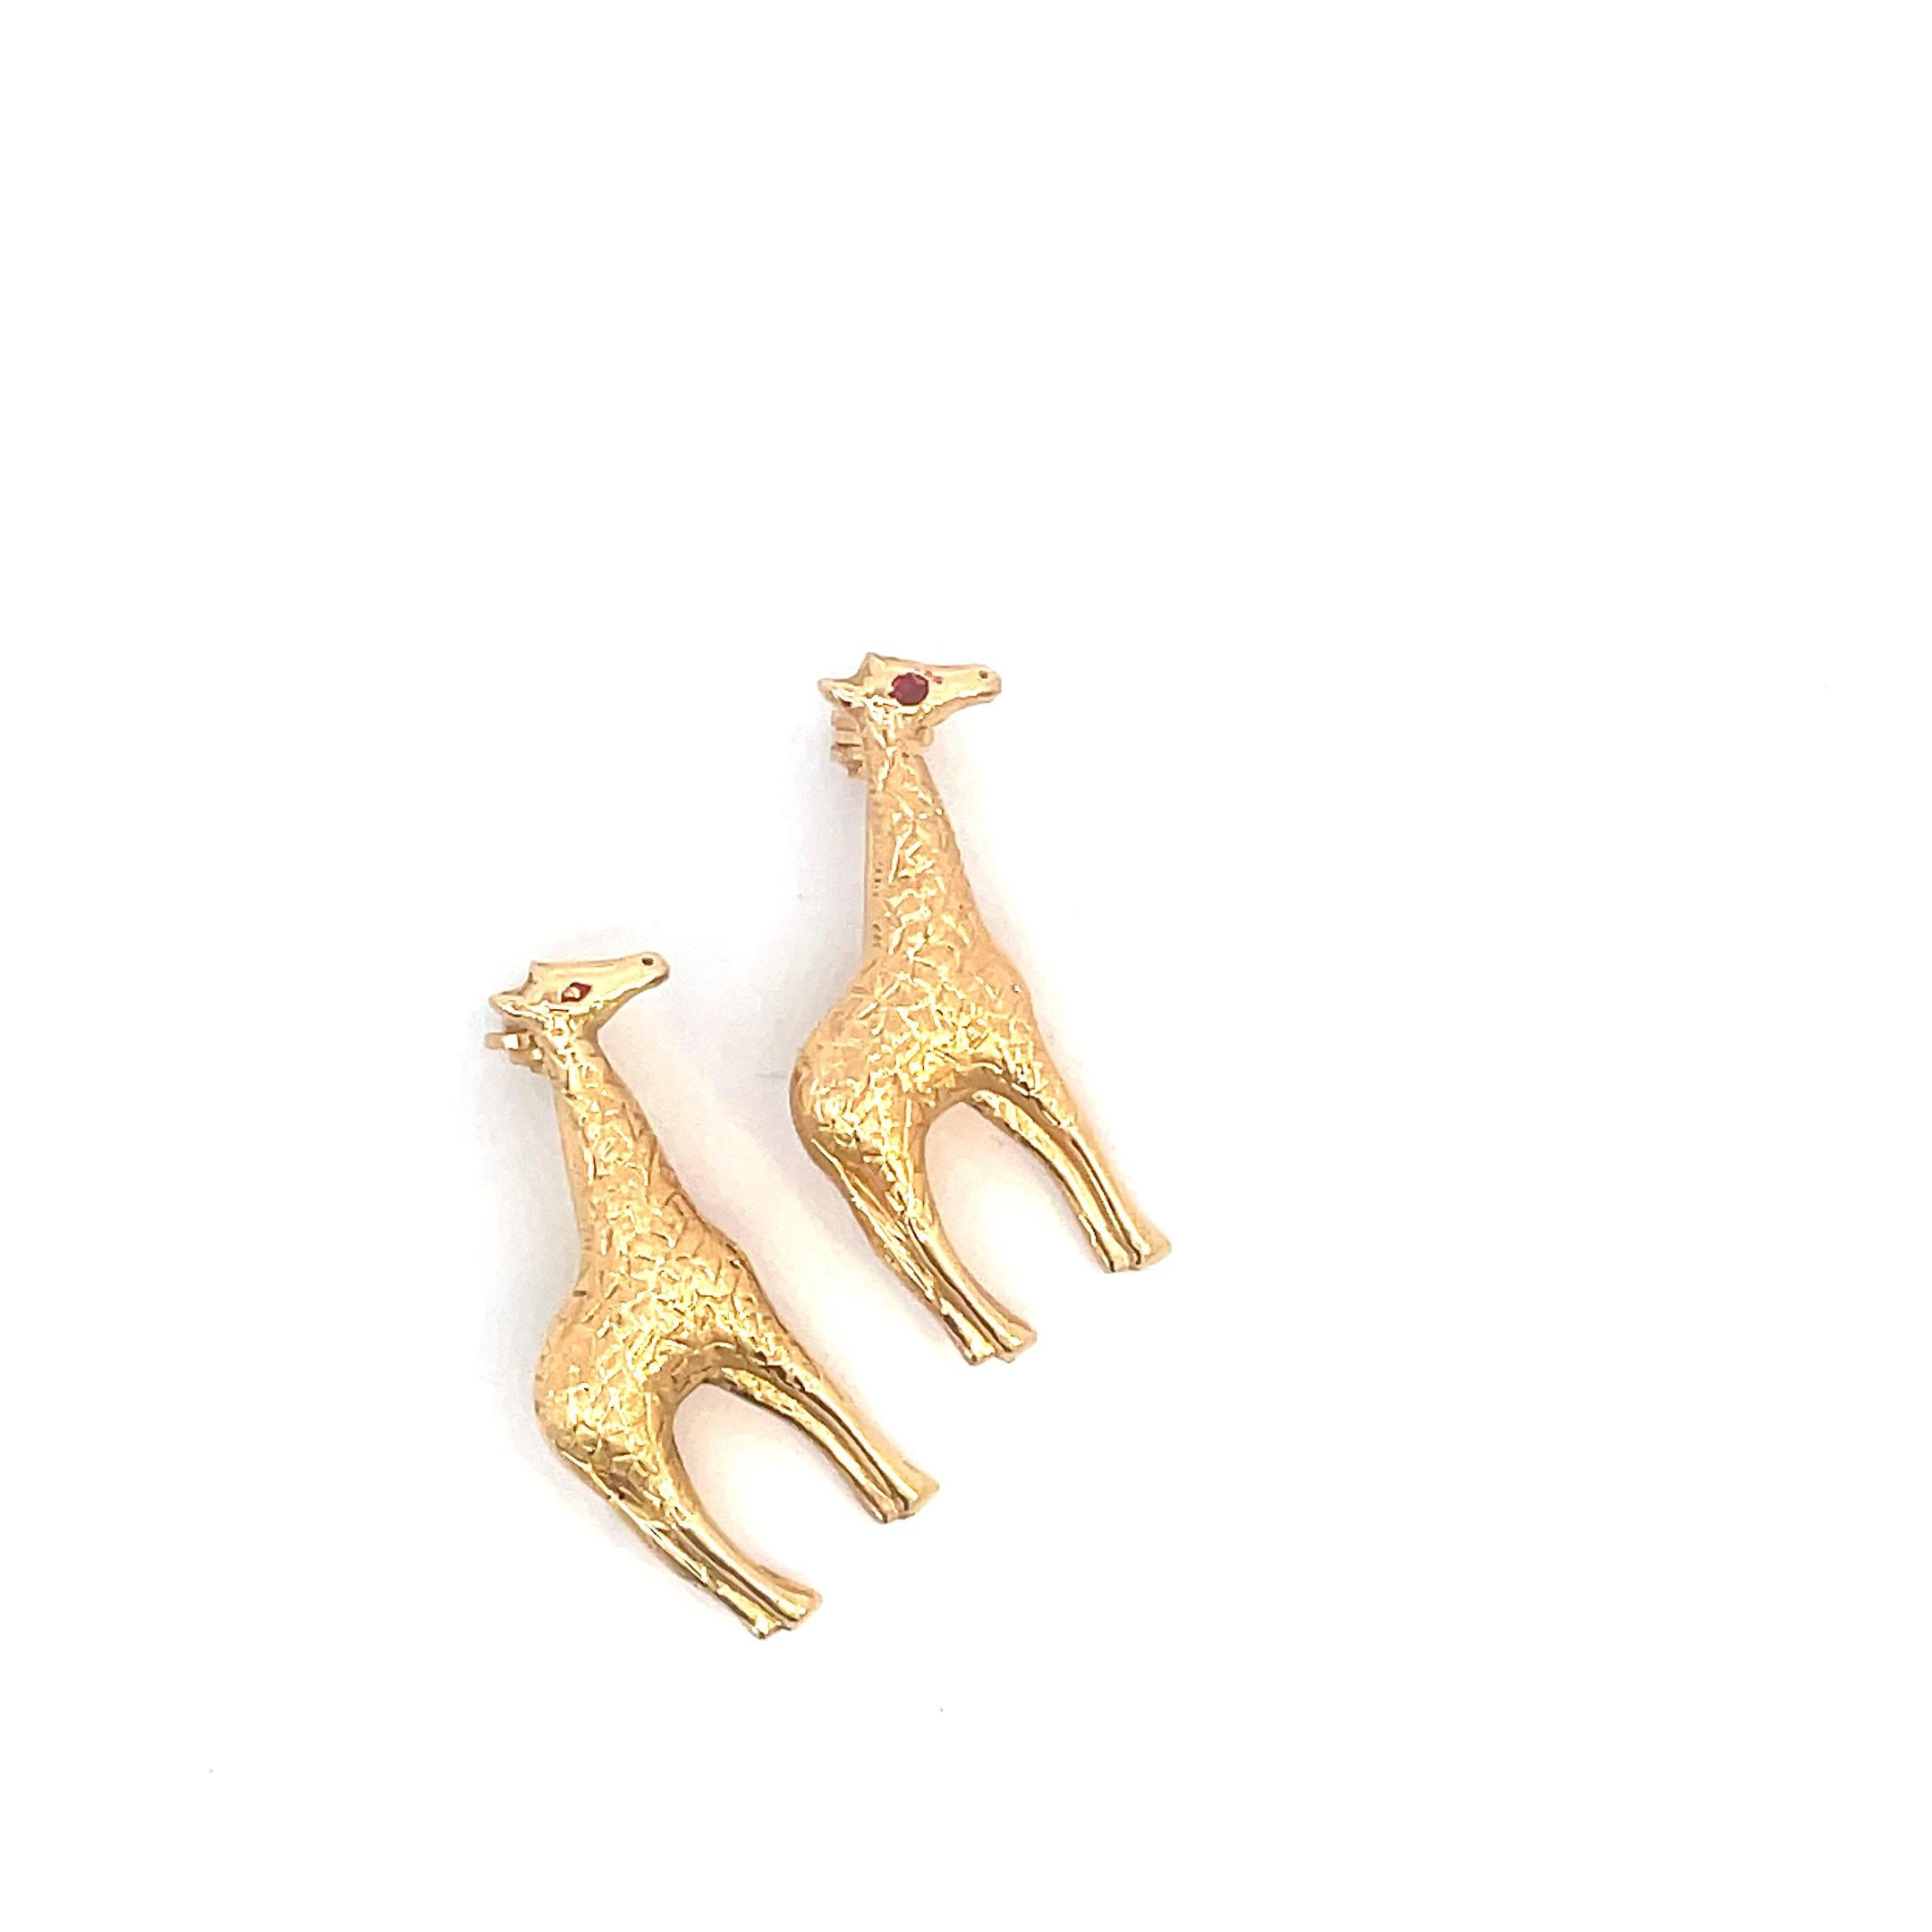 Captivating Italian Craftsmanship: 18kt Yellow Gold Giraffe Twin Brooches

Add a touch of whimsy and elegance to your collection with these delightful twin giraffe brooches, crafted with meticulous Italian artistry in 18kt yellow gold. Each brooch